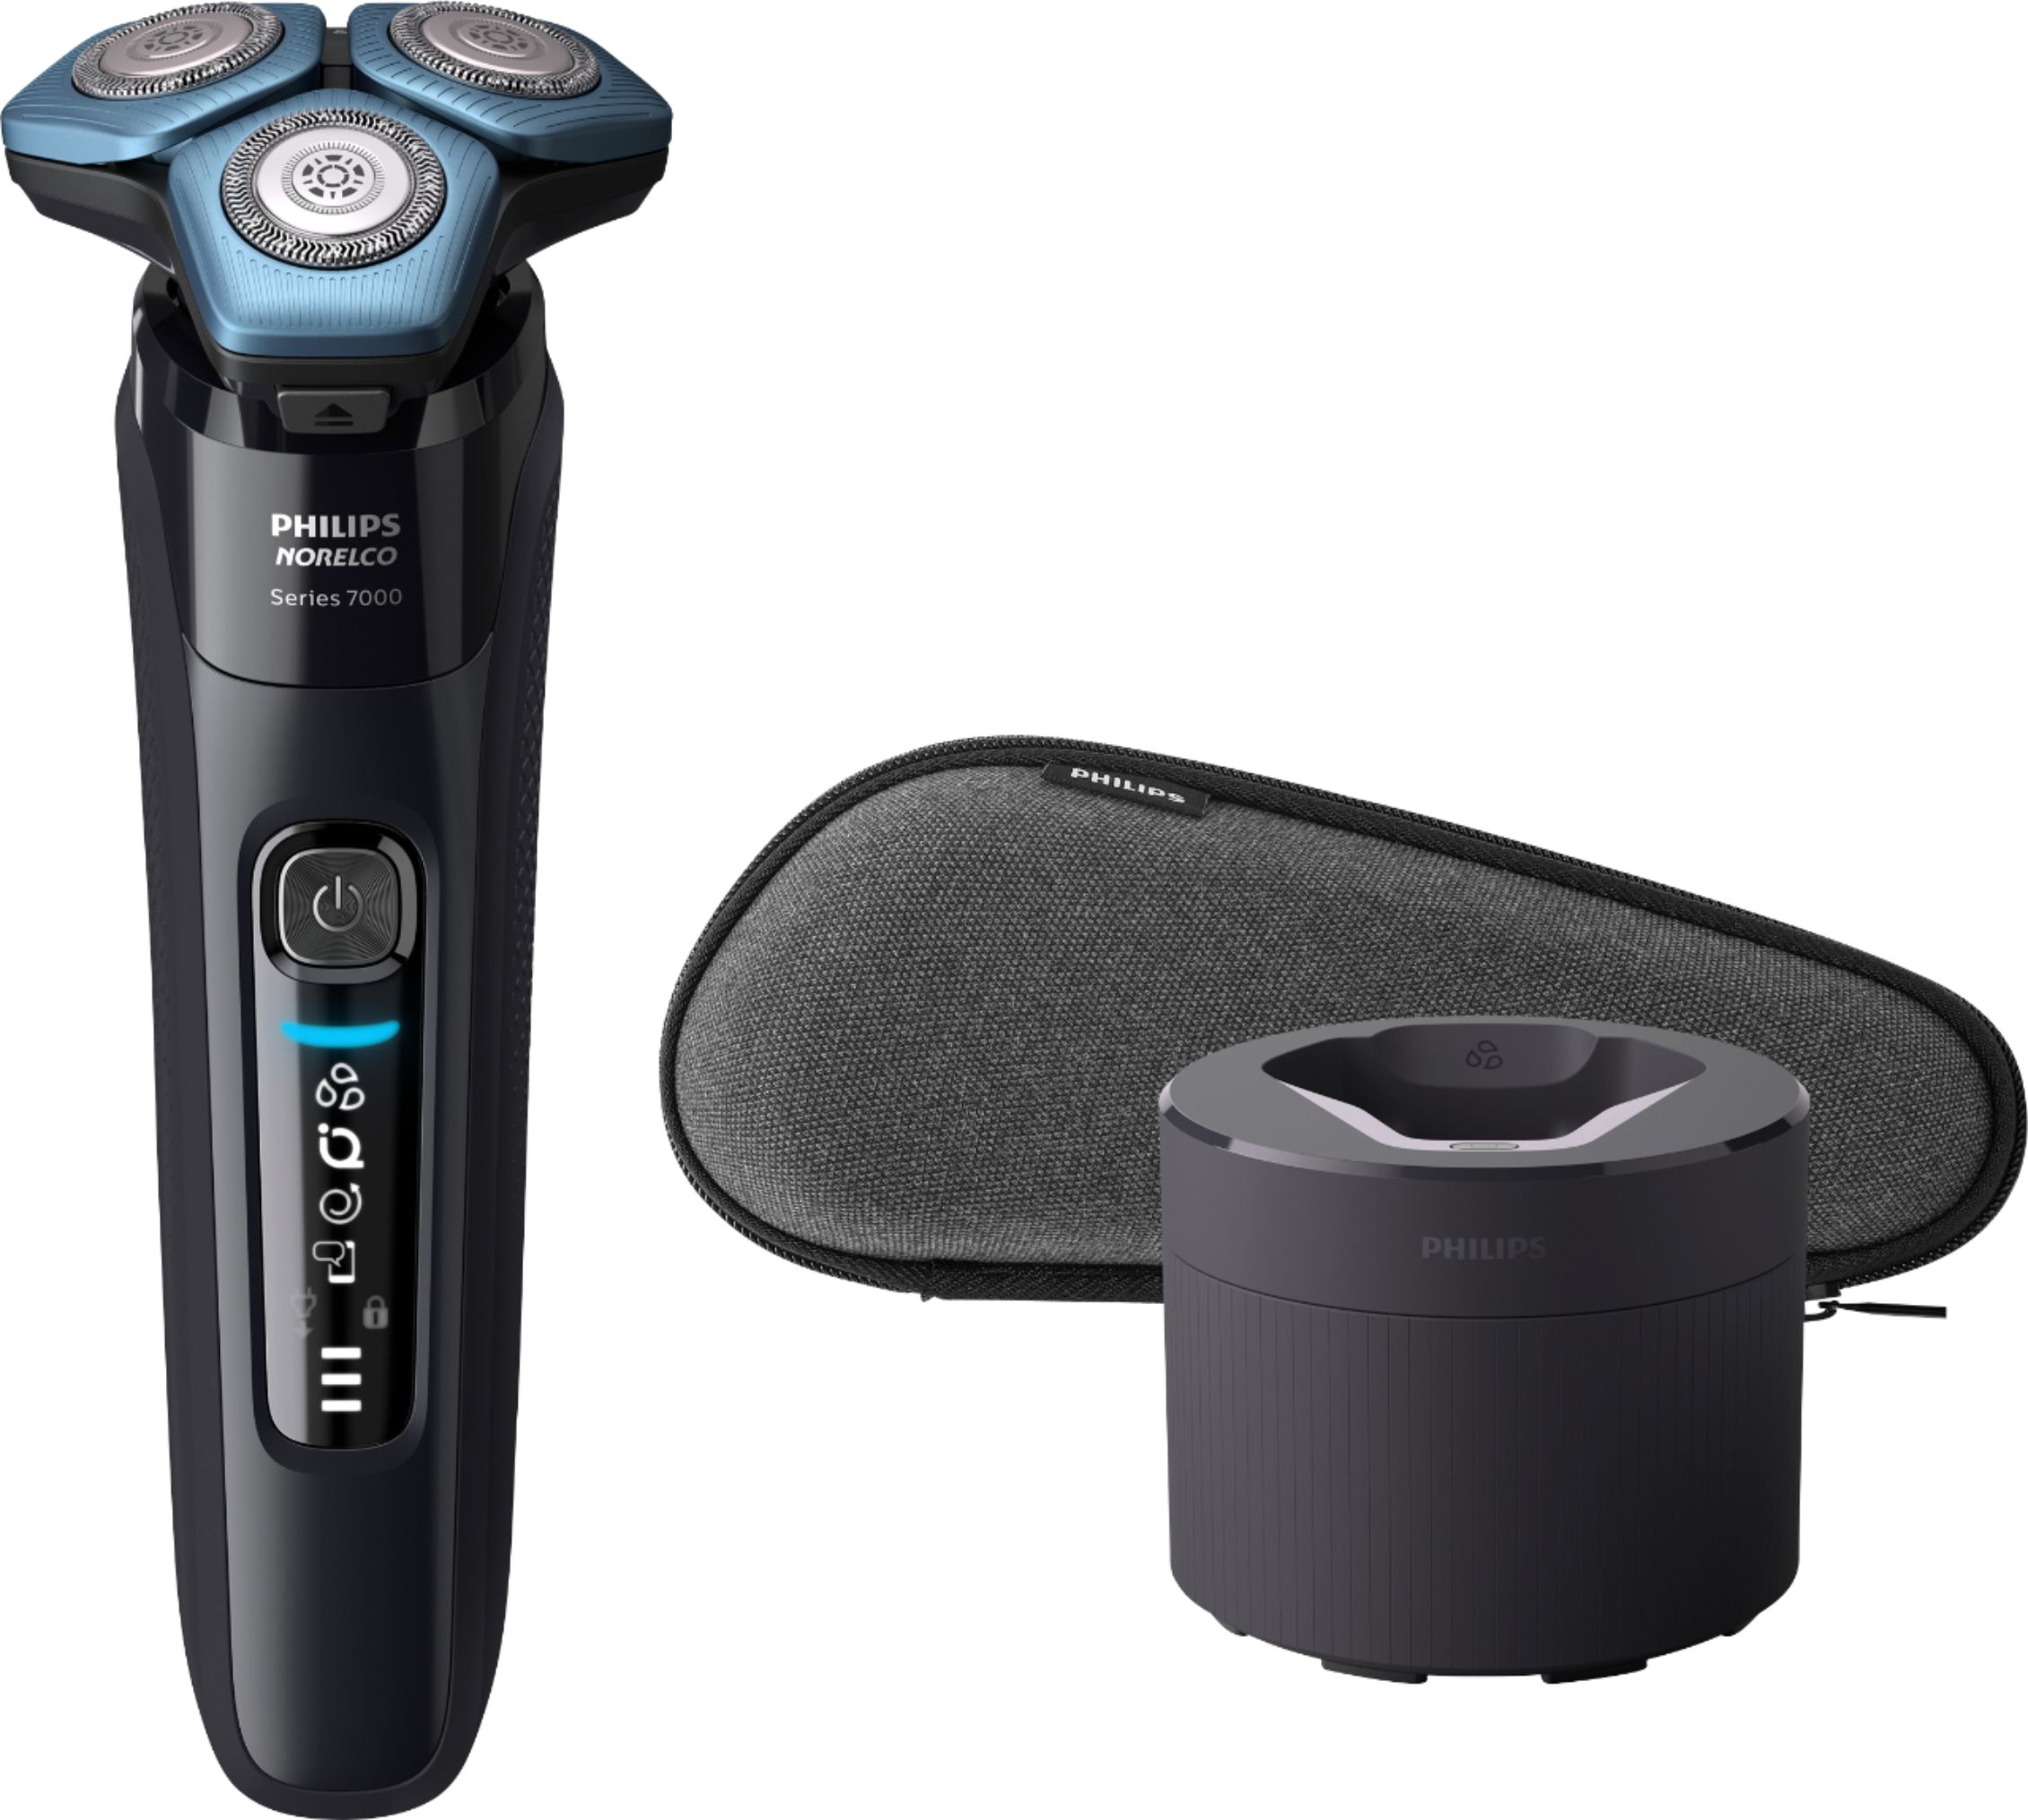 Angle View: Philips Norelco Shaver 7500, Rechargeable Wet & Dry Electric Shaver with SenseIQ Technology - Ink Black